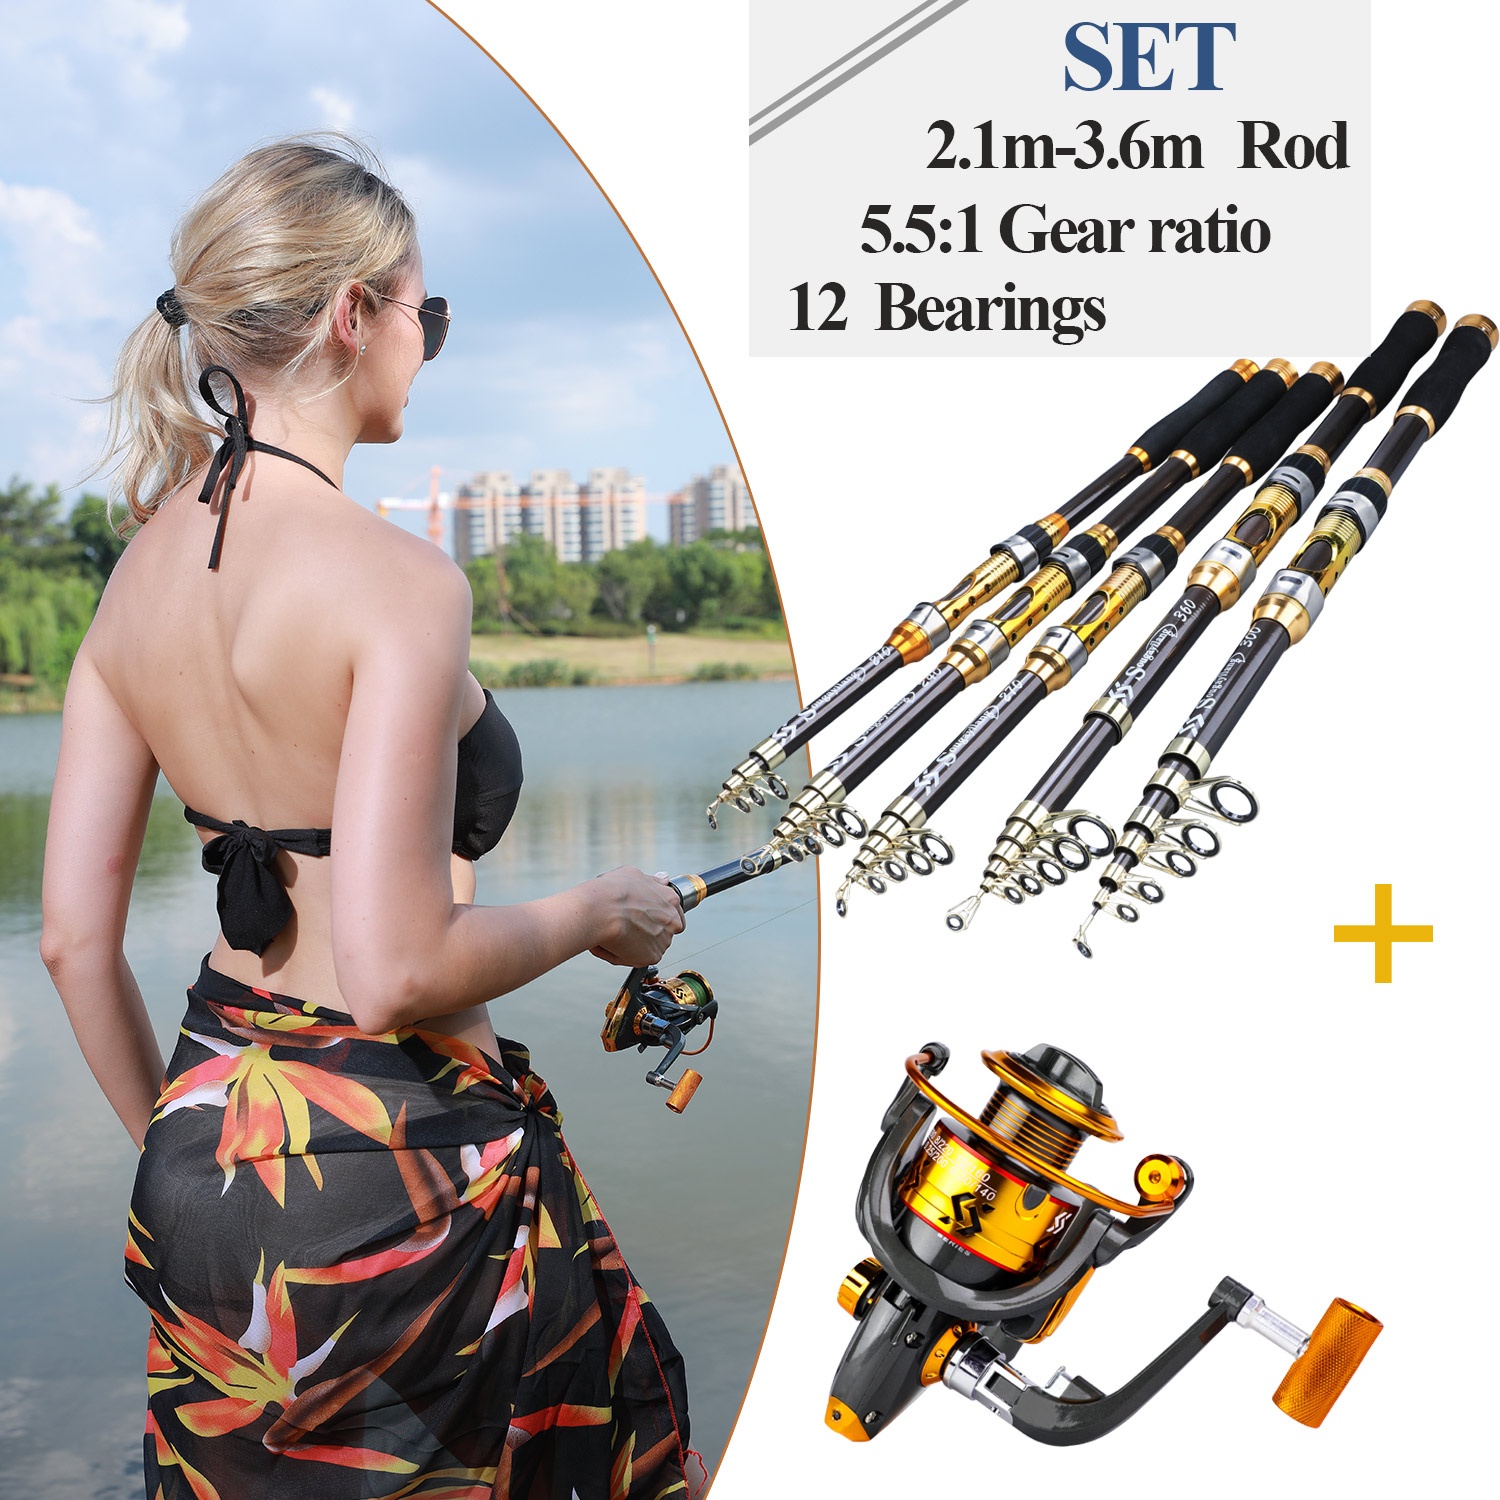 Leisure Sports 65 Telescopic Fishing Rod And Size 20 Spinning